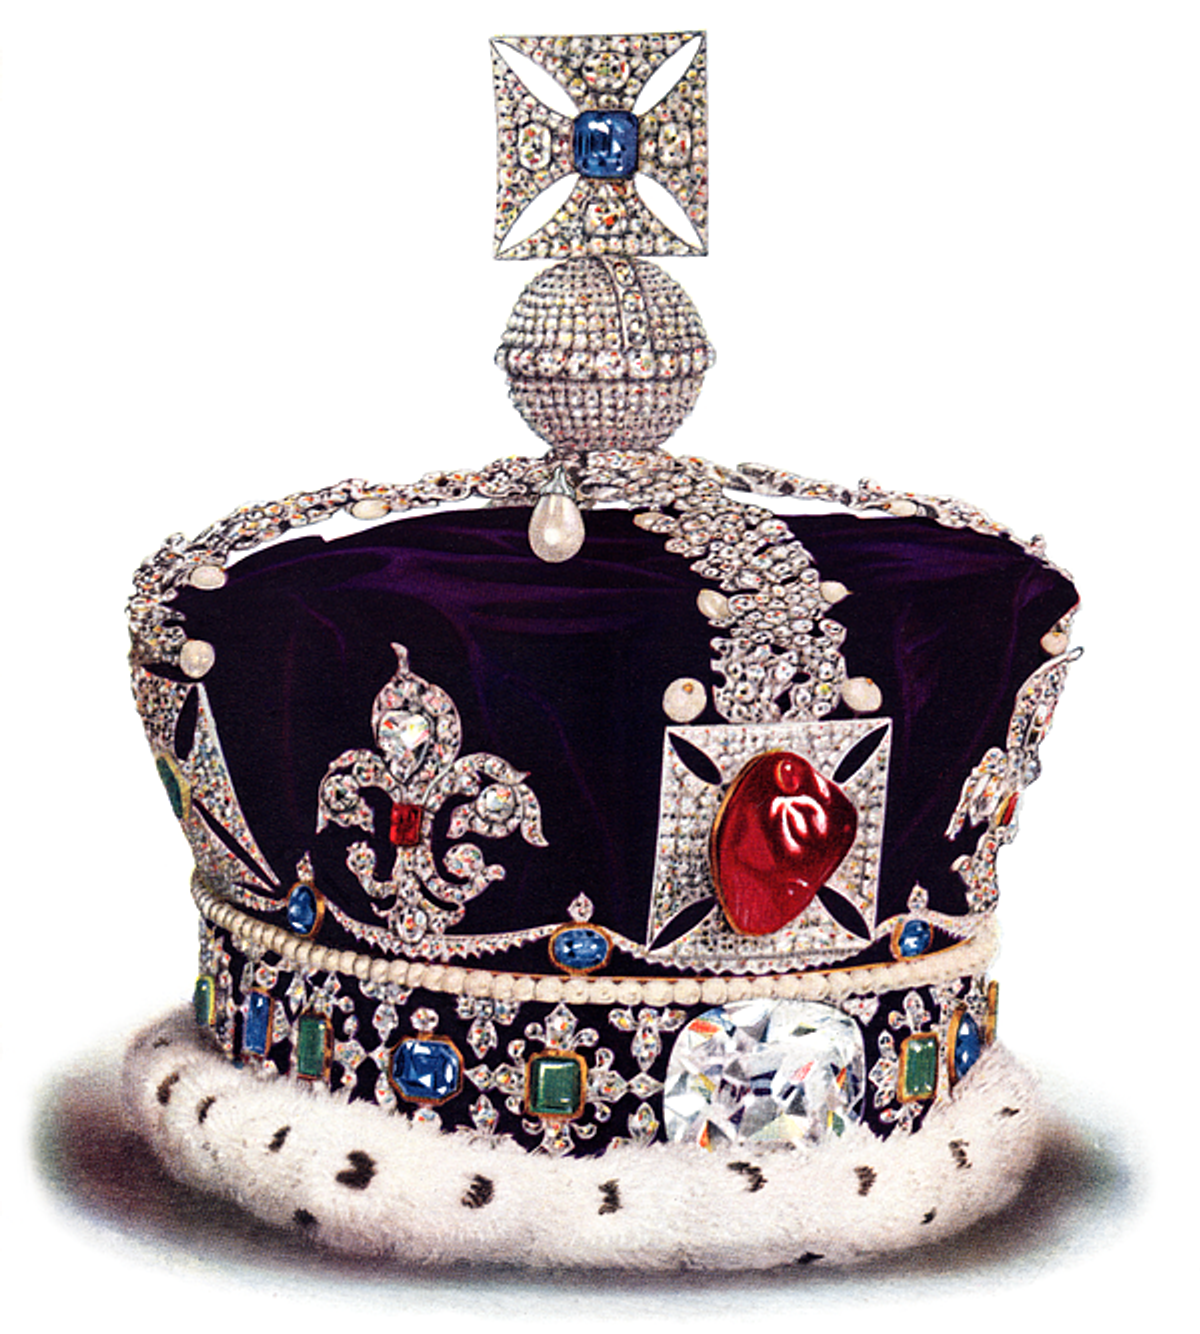 The Imperial State Crown of the United Kingdom

Image: G. Younghusband & C. Davenport's The Crown Jewels of England (1919) ,  p. 6.